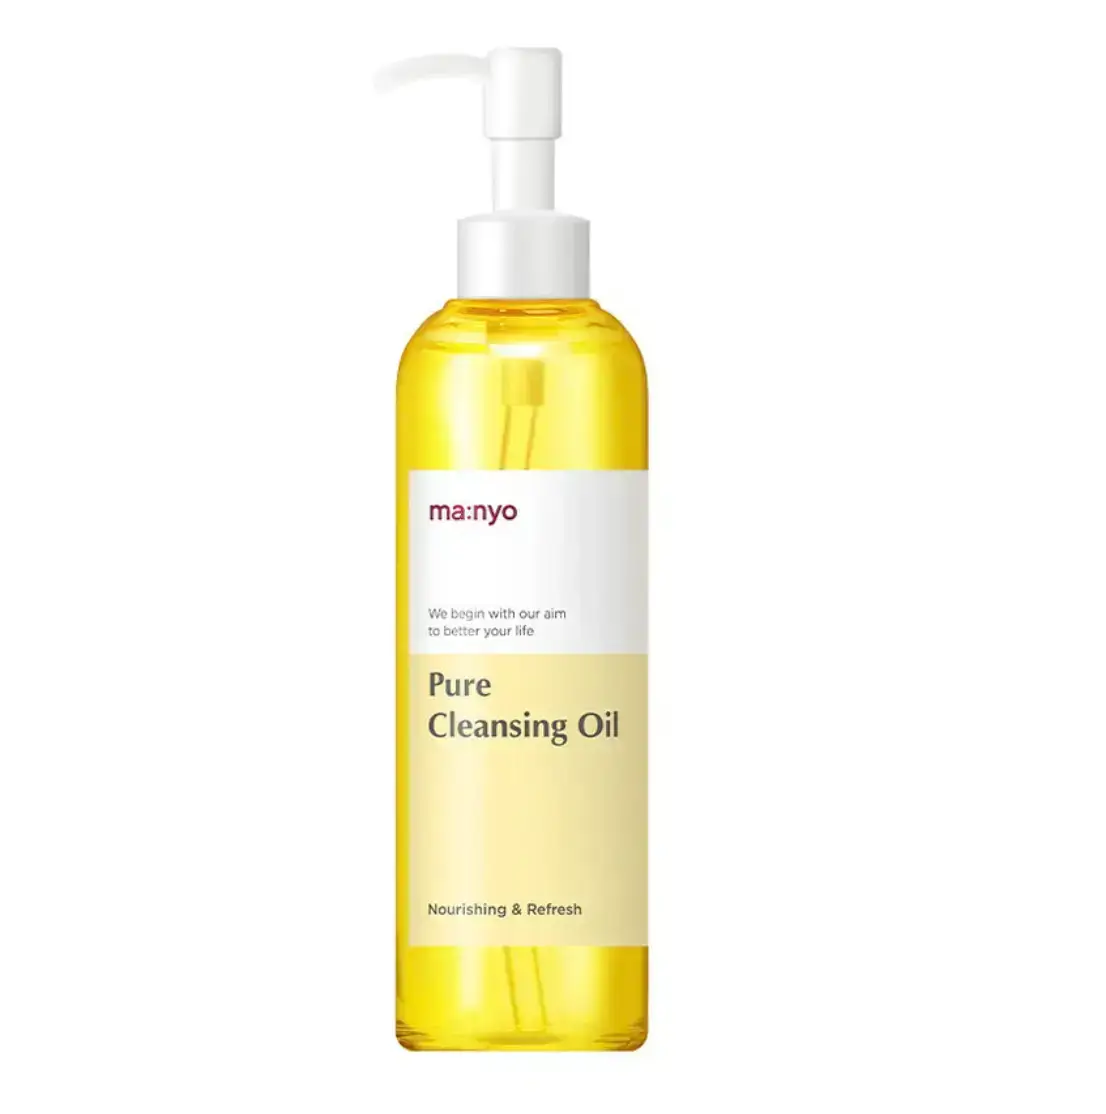 Best korean skincare cleansing oil- Manyo factory pure cleansing oil